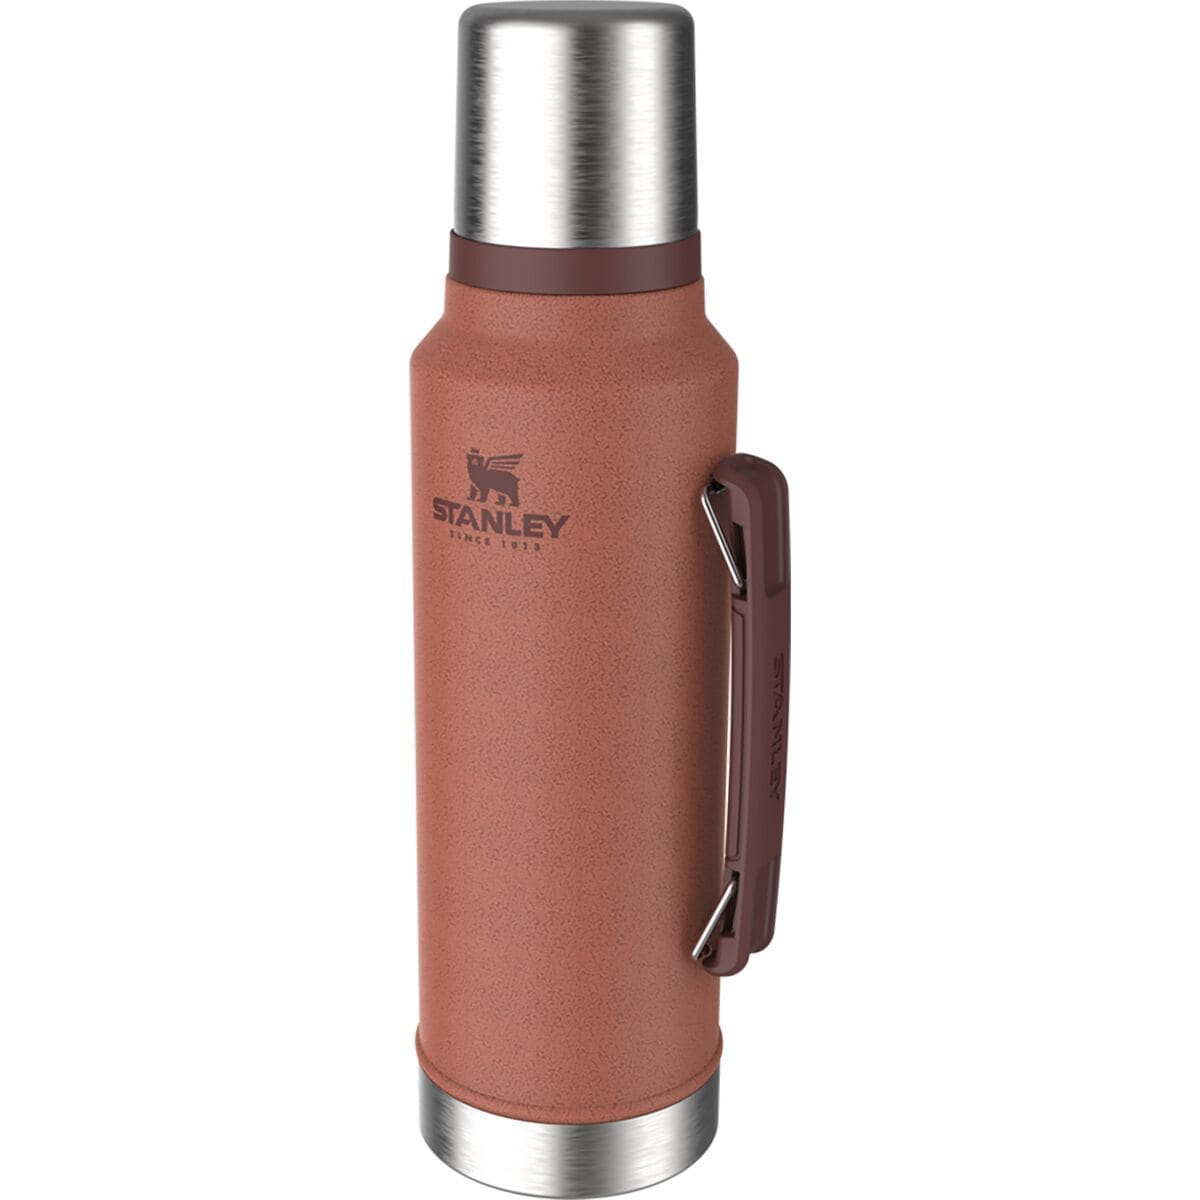 The Stanley Classic Legendary Bottle Is Loved by Generations